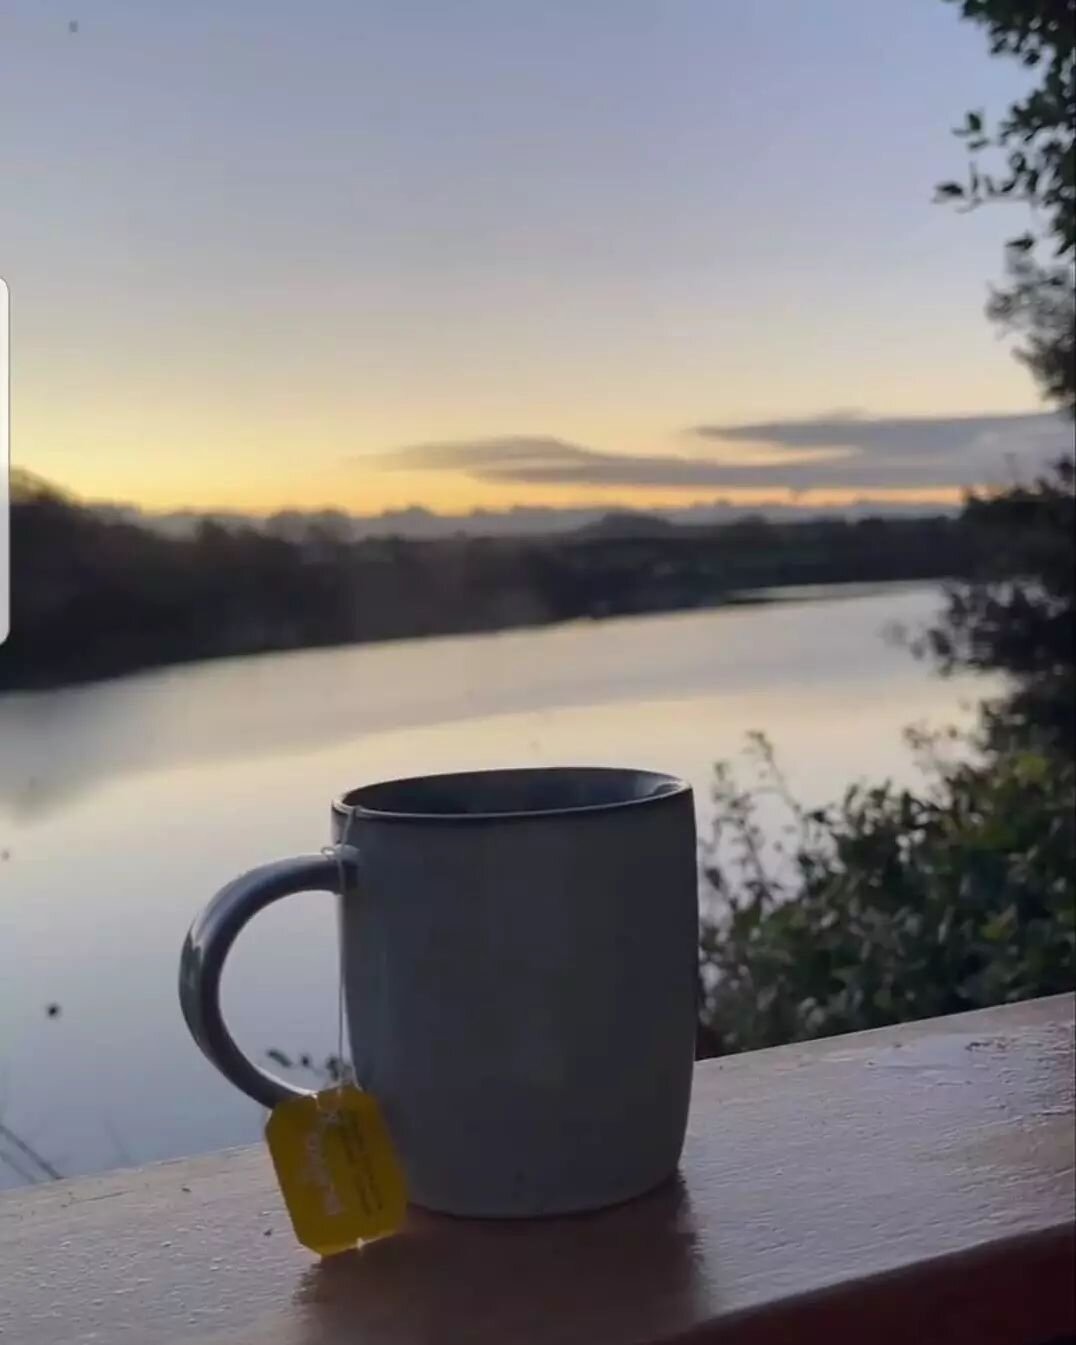 Thanks for capturing the low winter sun @bowcombeboathouse so beautifully last week @niomismart . 

It's such a peaceful place to spend  a couple of days planning new projects, reading a book, trying new gins, making a slow breakfast, watching the ti